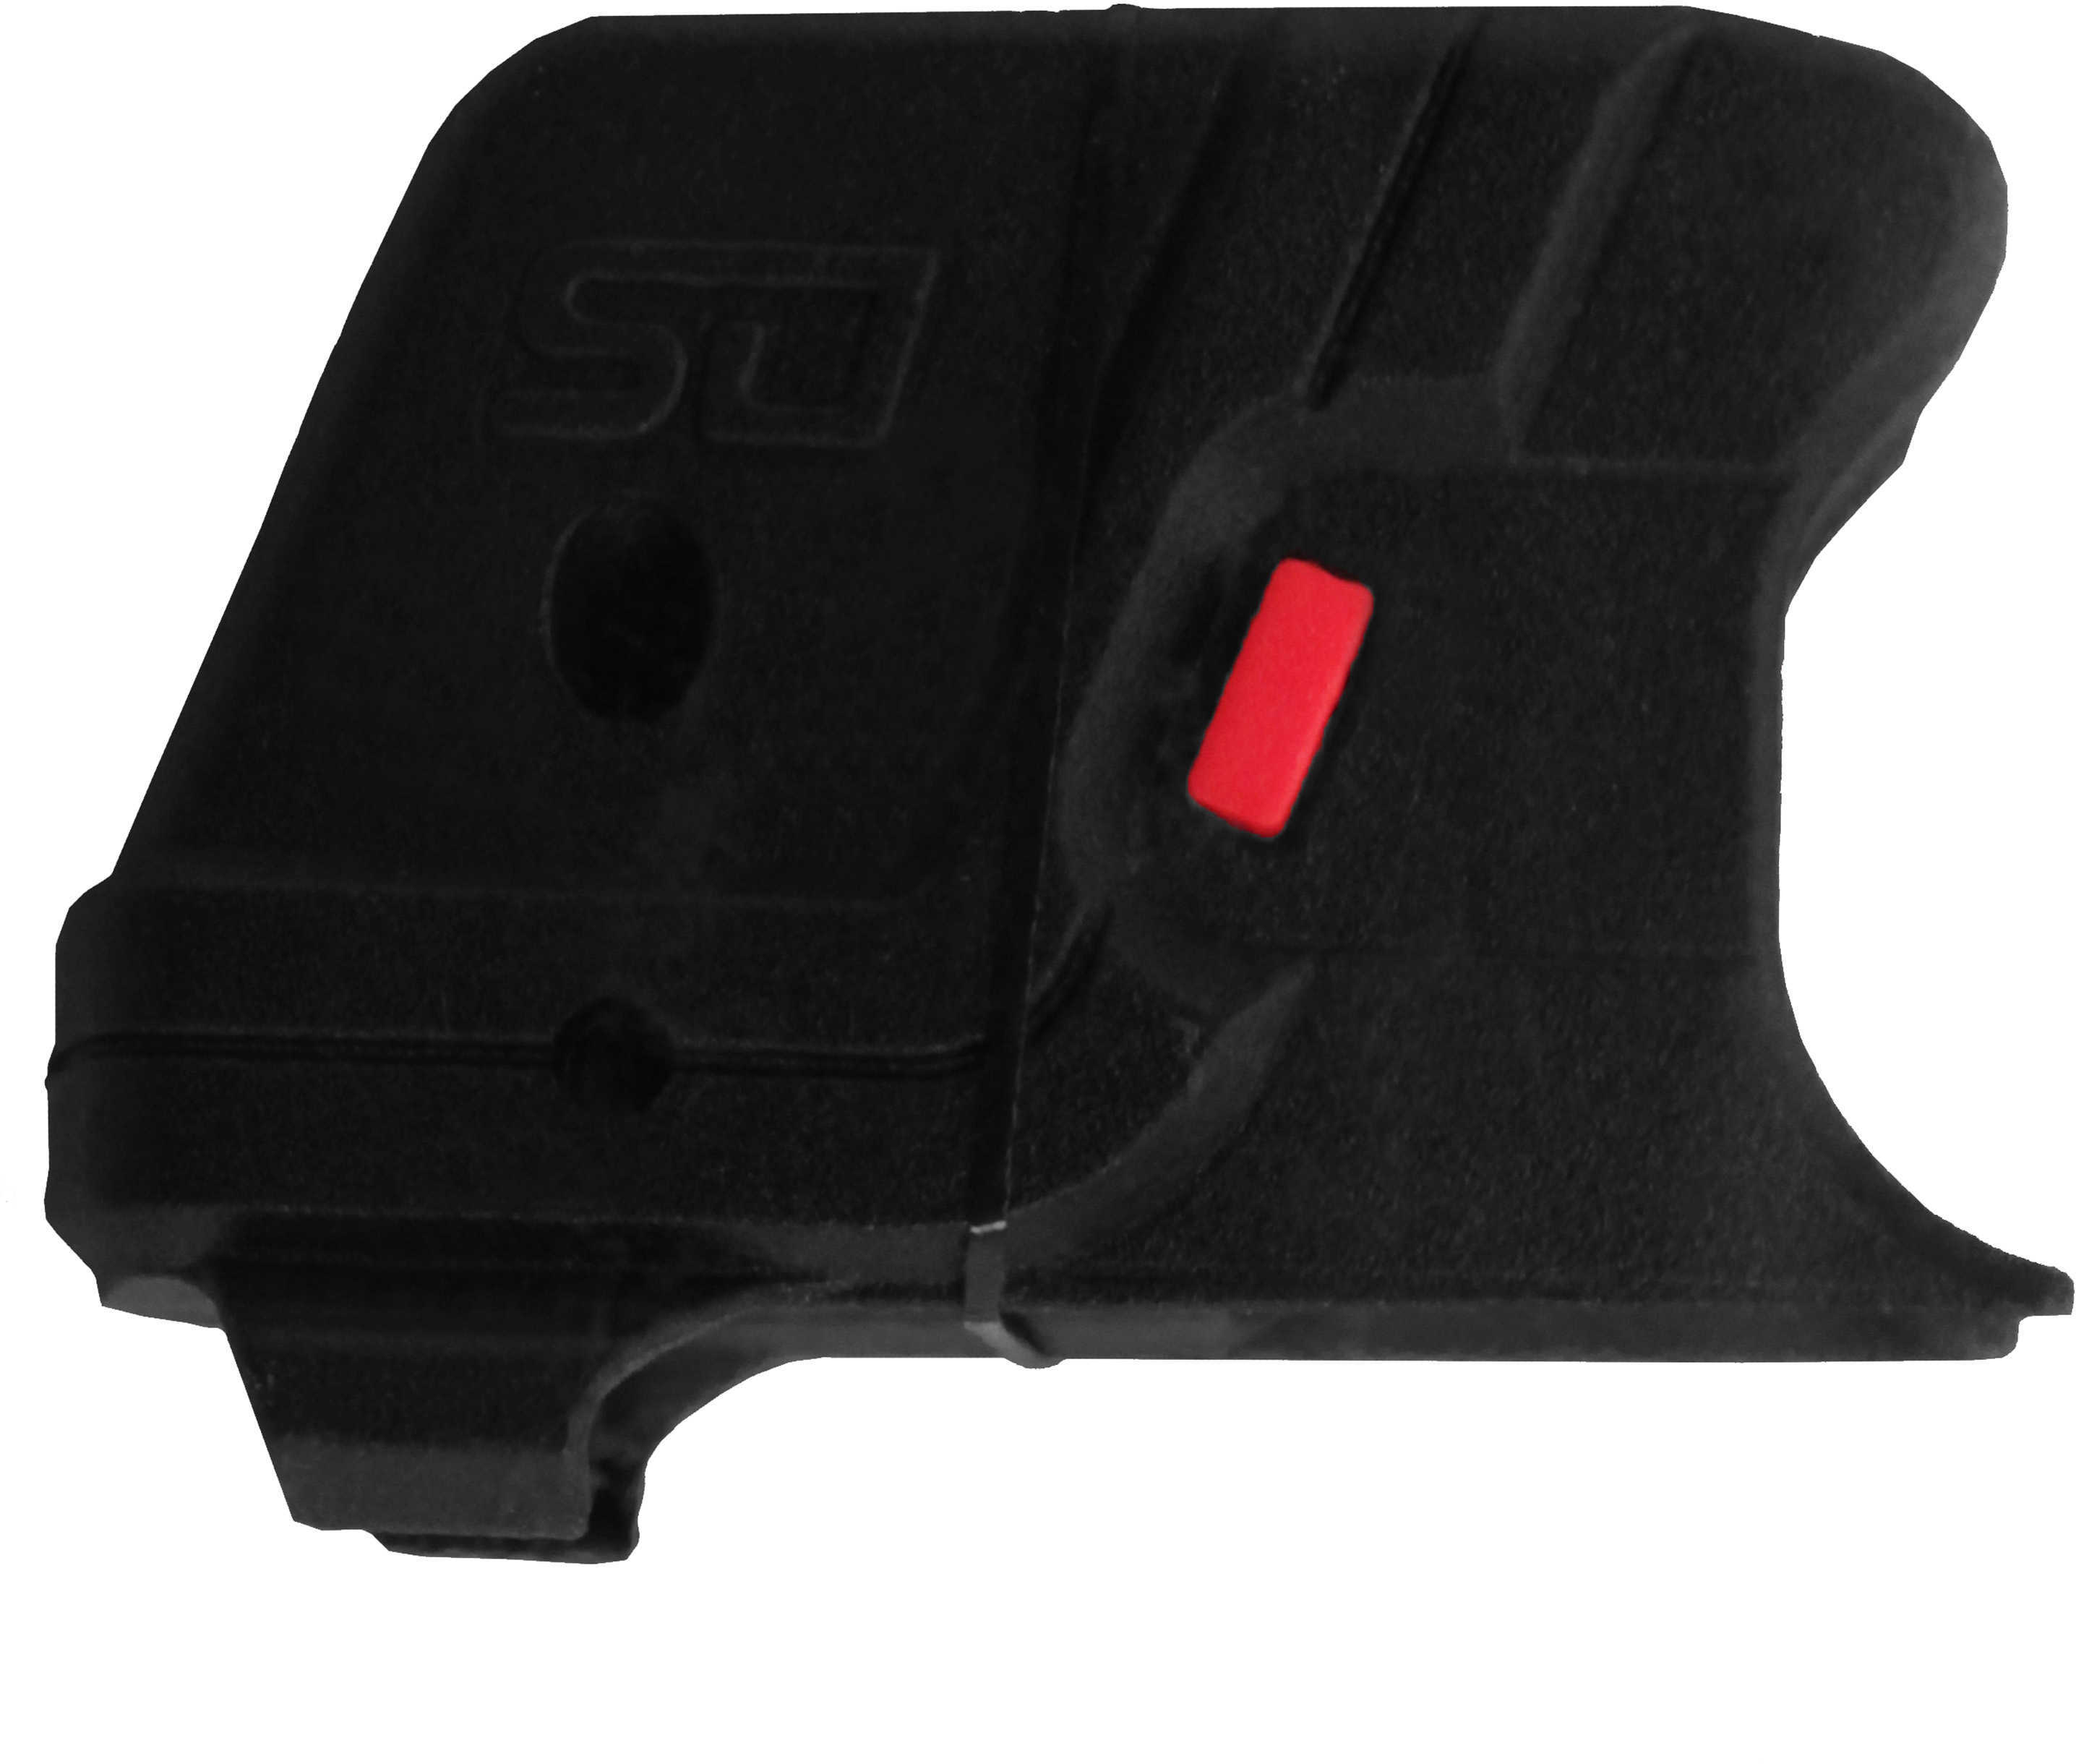 Ctc Accuguard For Glock